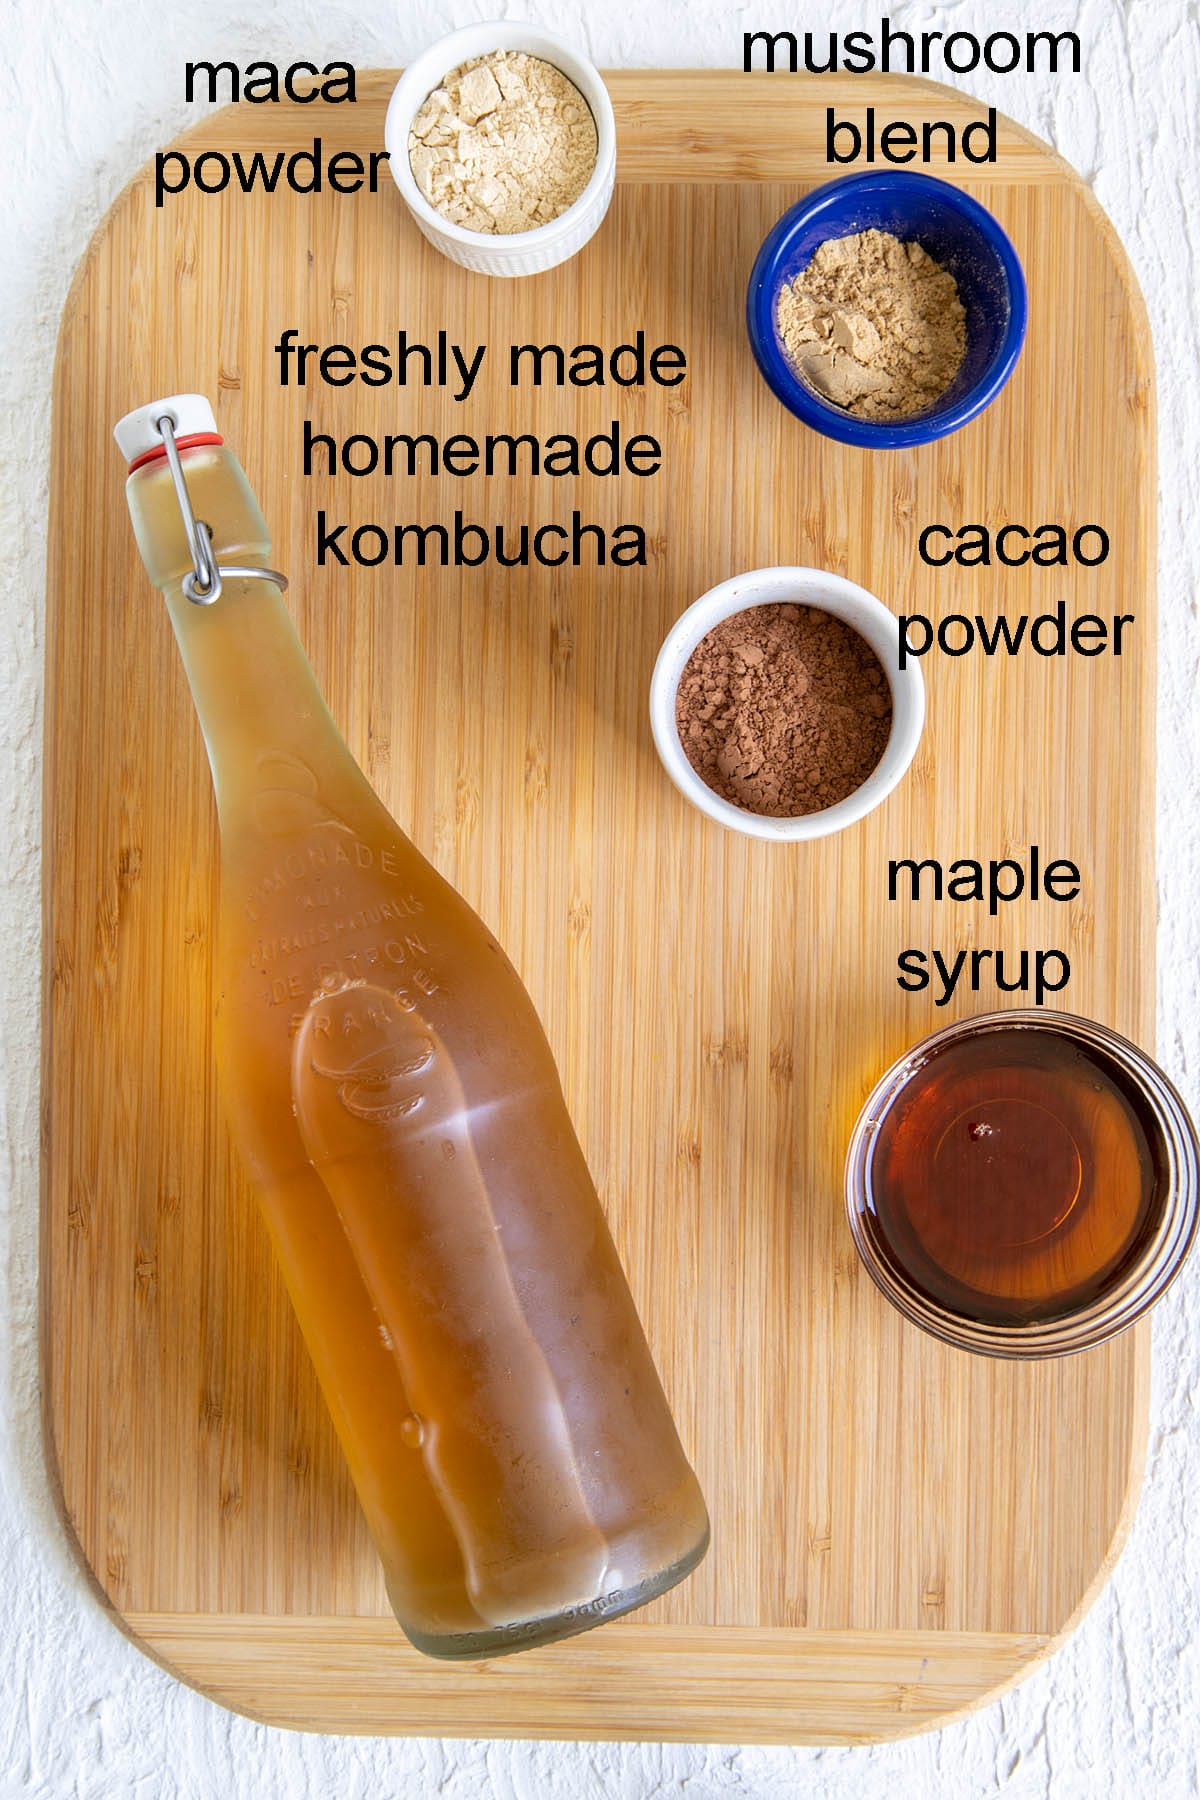 Ingredients for chocolate superfood kombucha on a cutting board with labels.